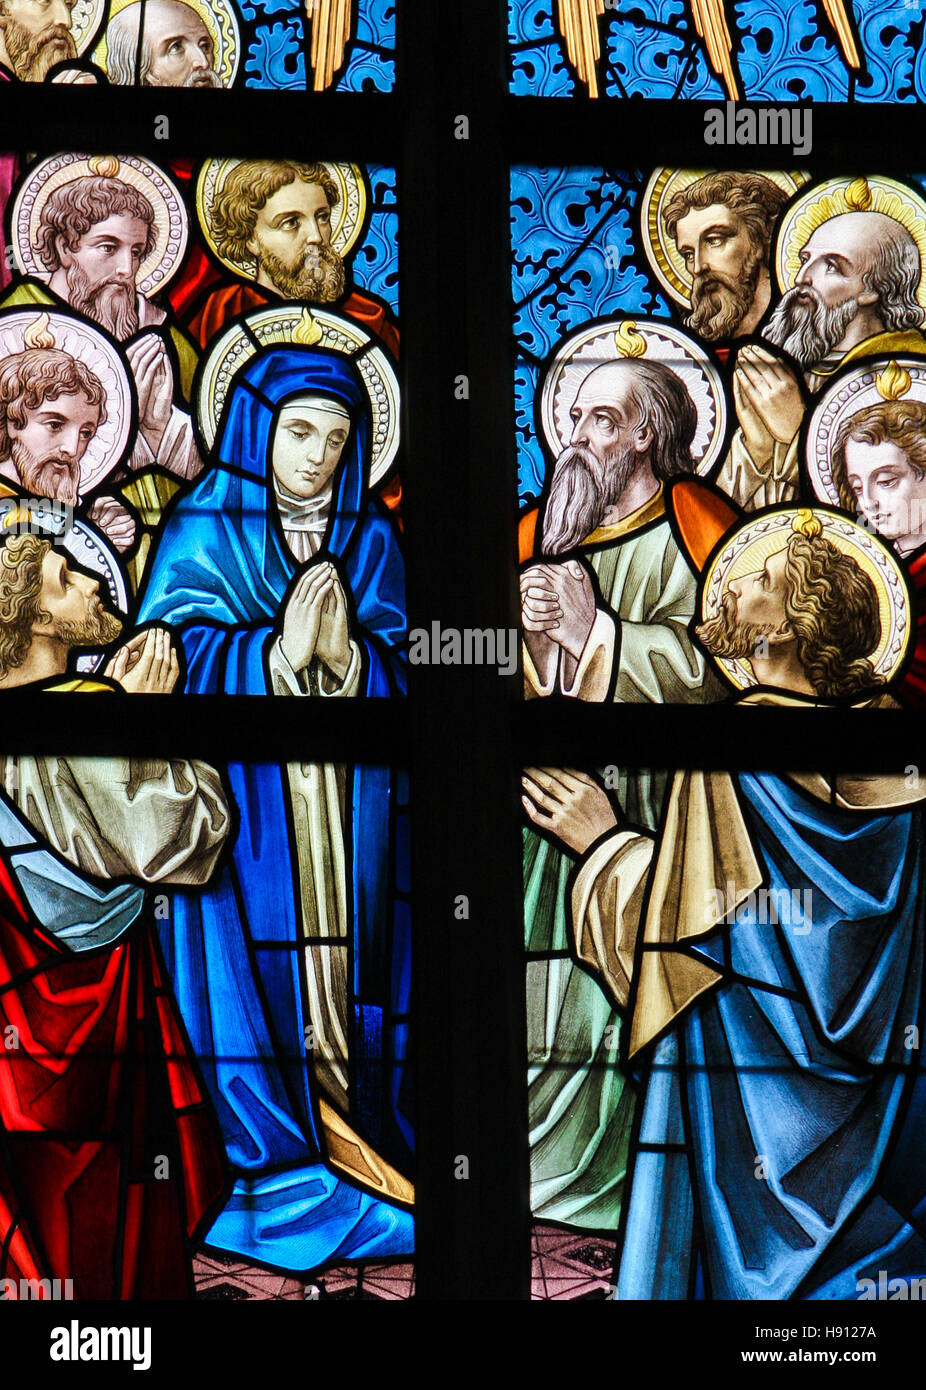 Stained Glass window depicting Mary and the Apostles on Pentecost in the Church of Alsemberg, Belgium. Stock Photo